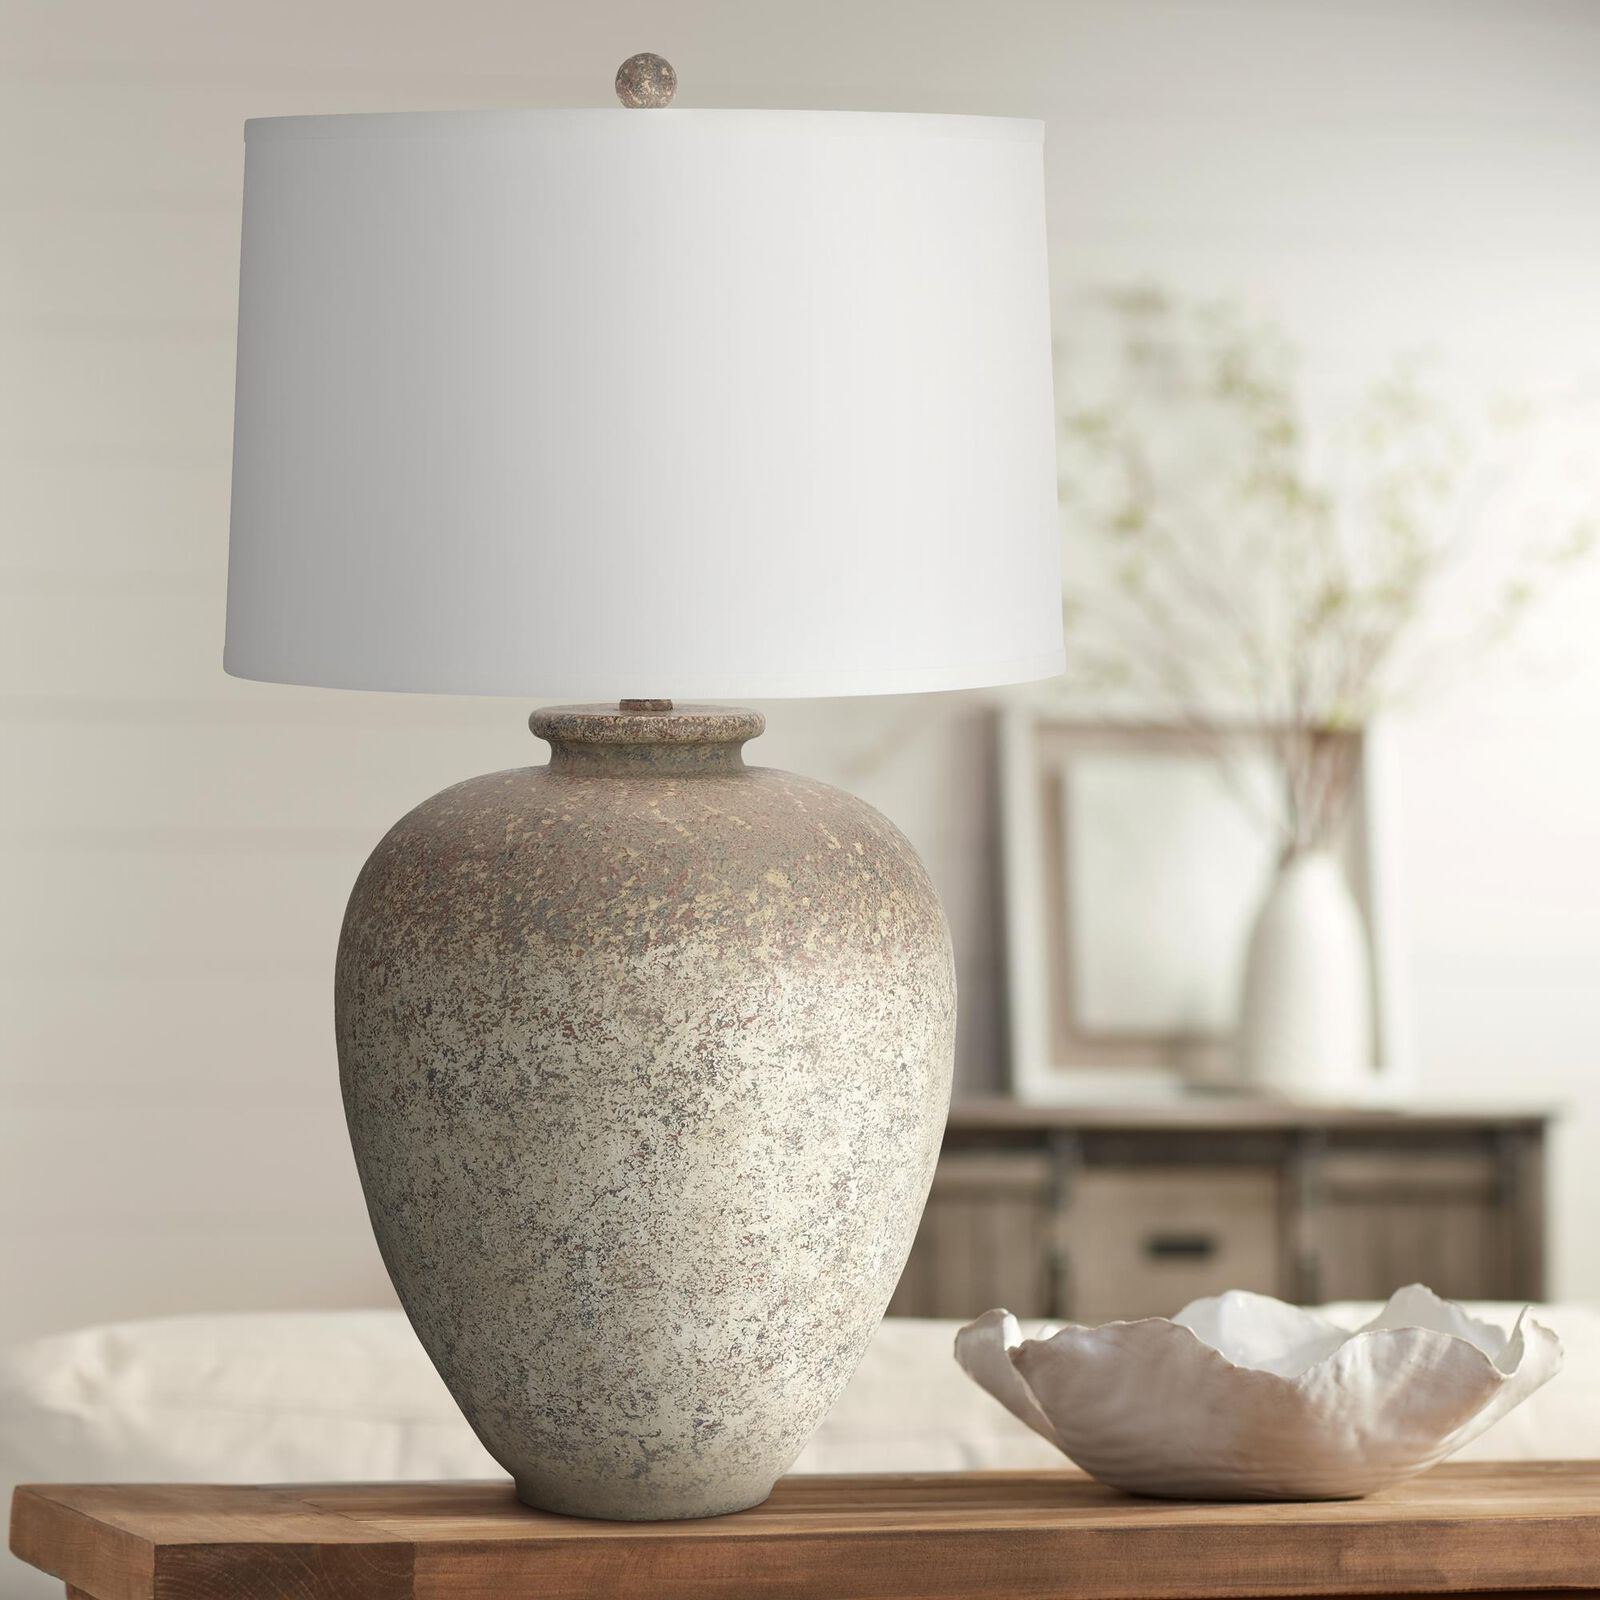 New


Eloy 29 Inch Table Lamp by Pacific Coast Lighting

Capitol ID: 4282869
MFR SKU: 79N57 | 1800 Lighting